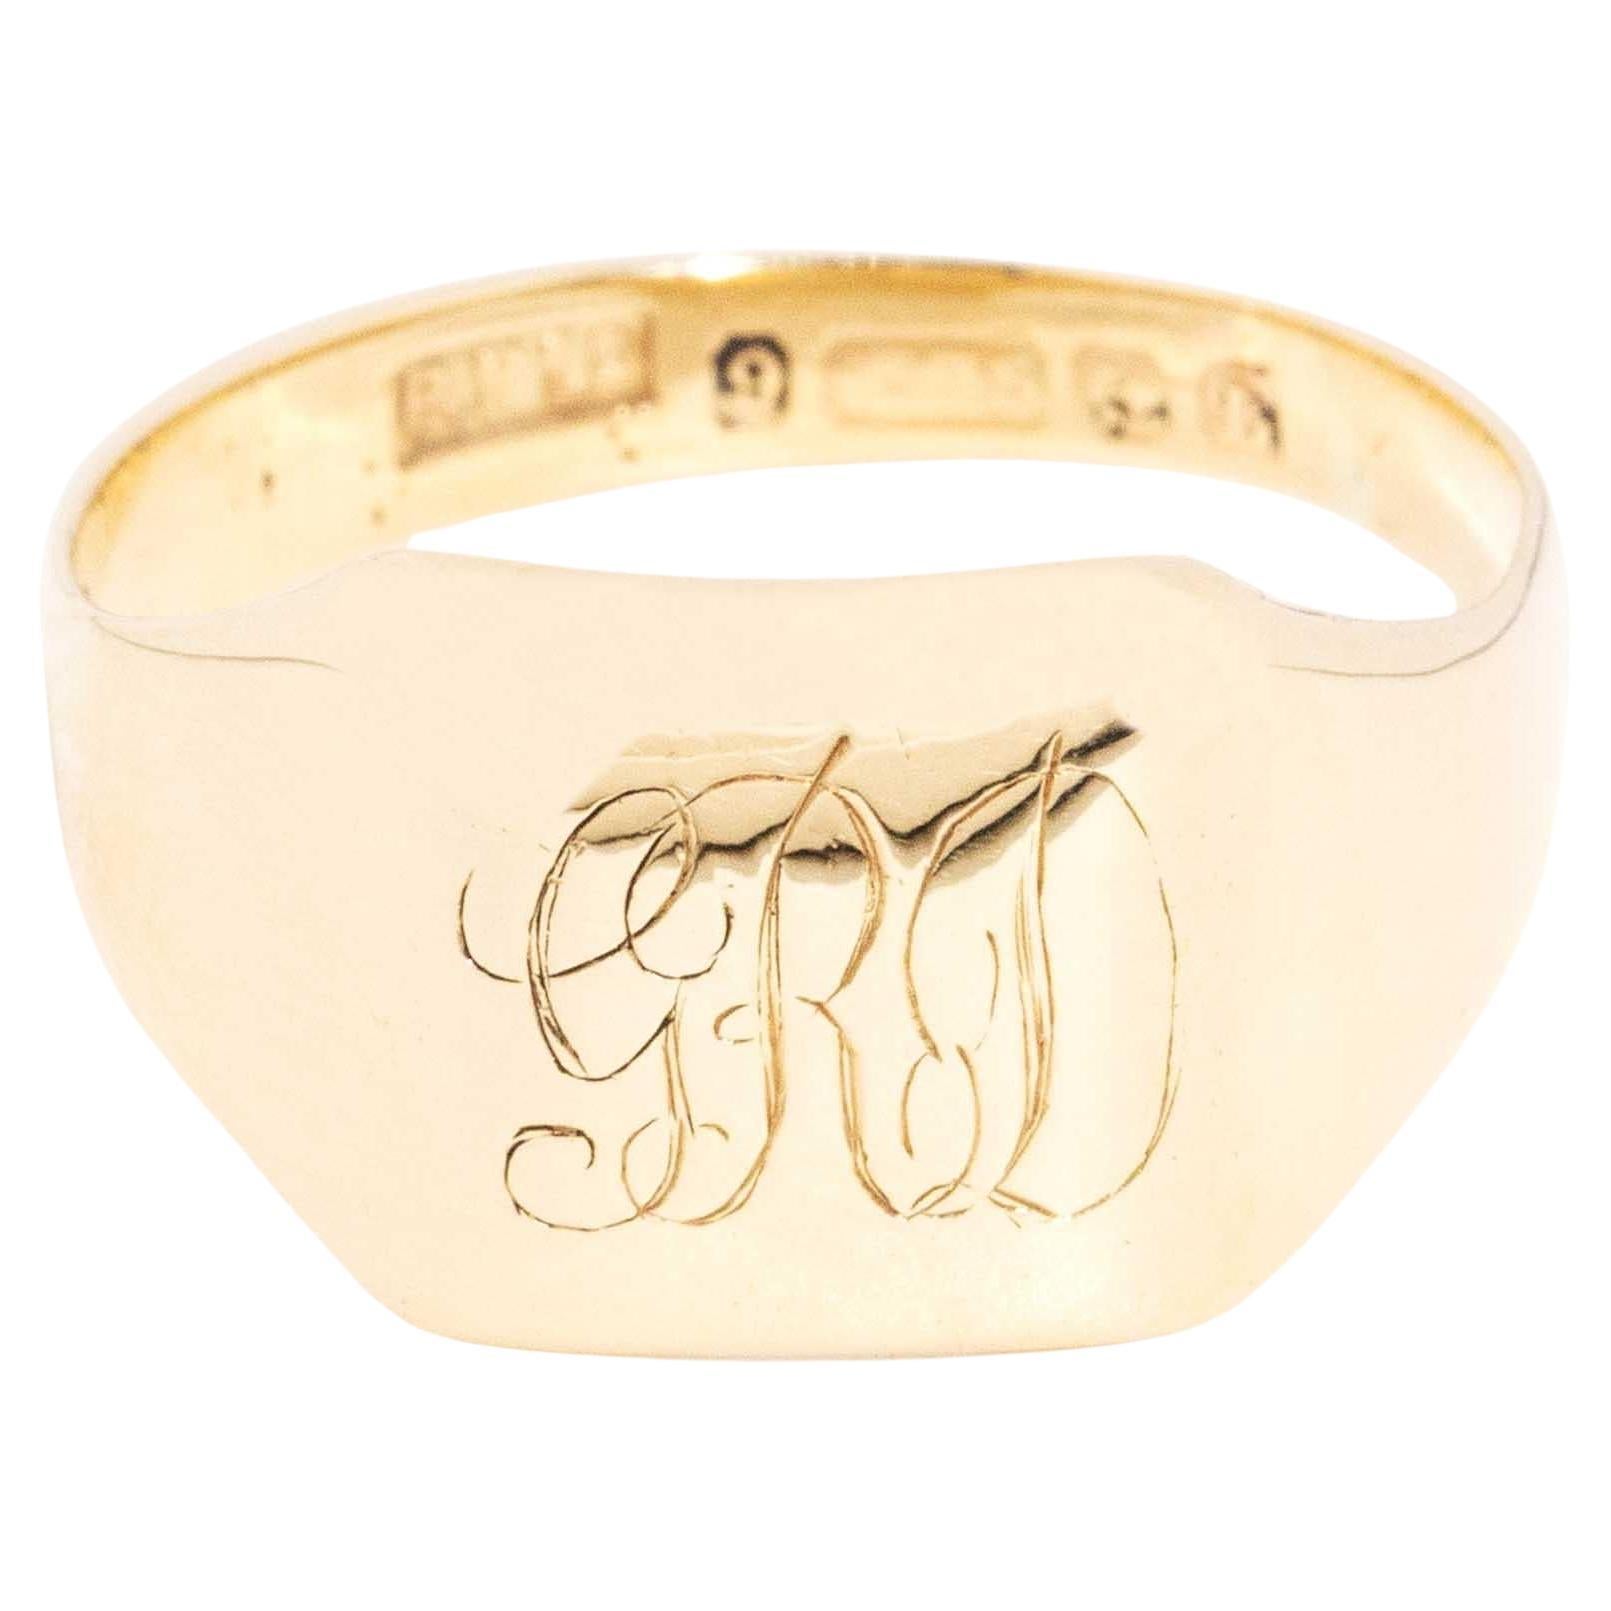 Vintage 1935 Hallmarked & Initialed Unisex Signet Ring 9 Carat Yellow Gold For Sale